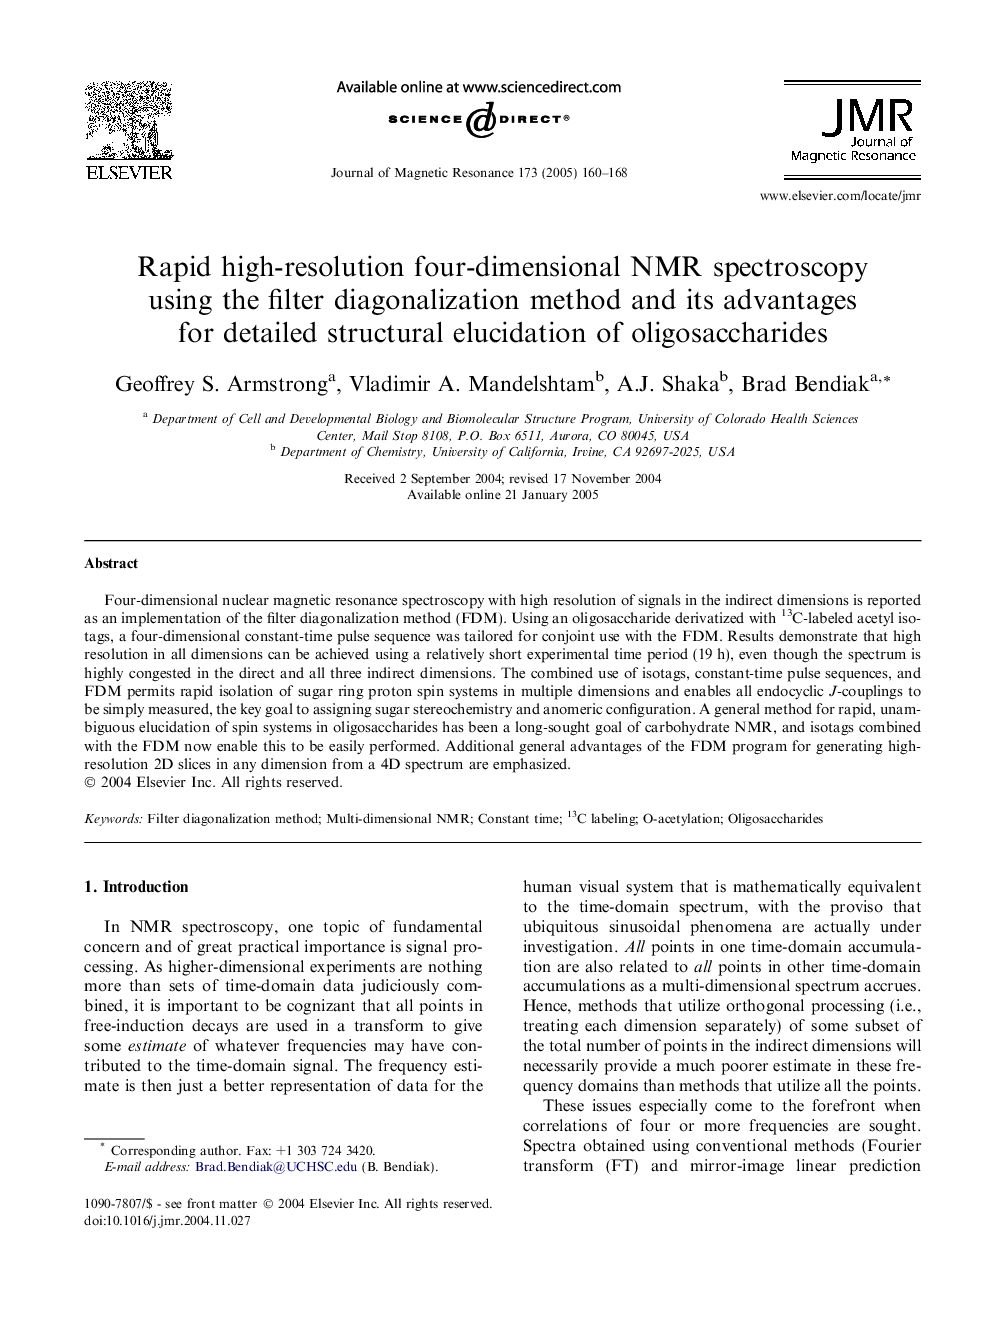 Rapid high-resolution four-dimensional NMR spectroscopy using the filter diagonalization method and its advantages for detailed structural elucidation of oligosaccharides